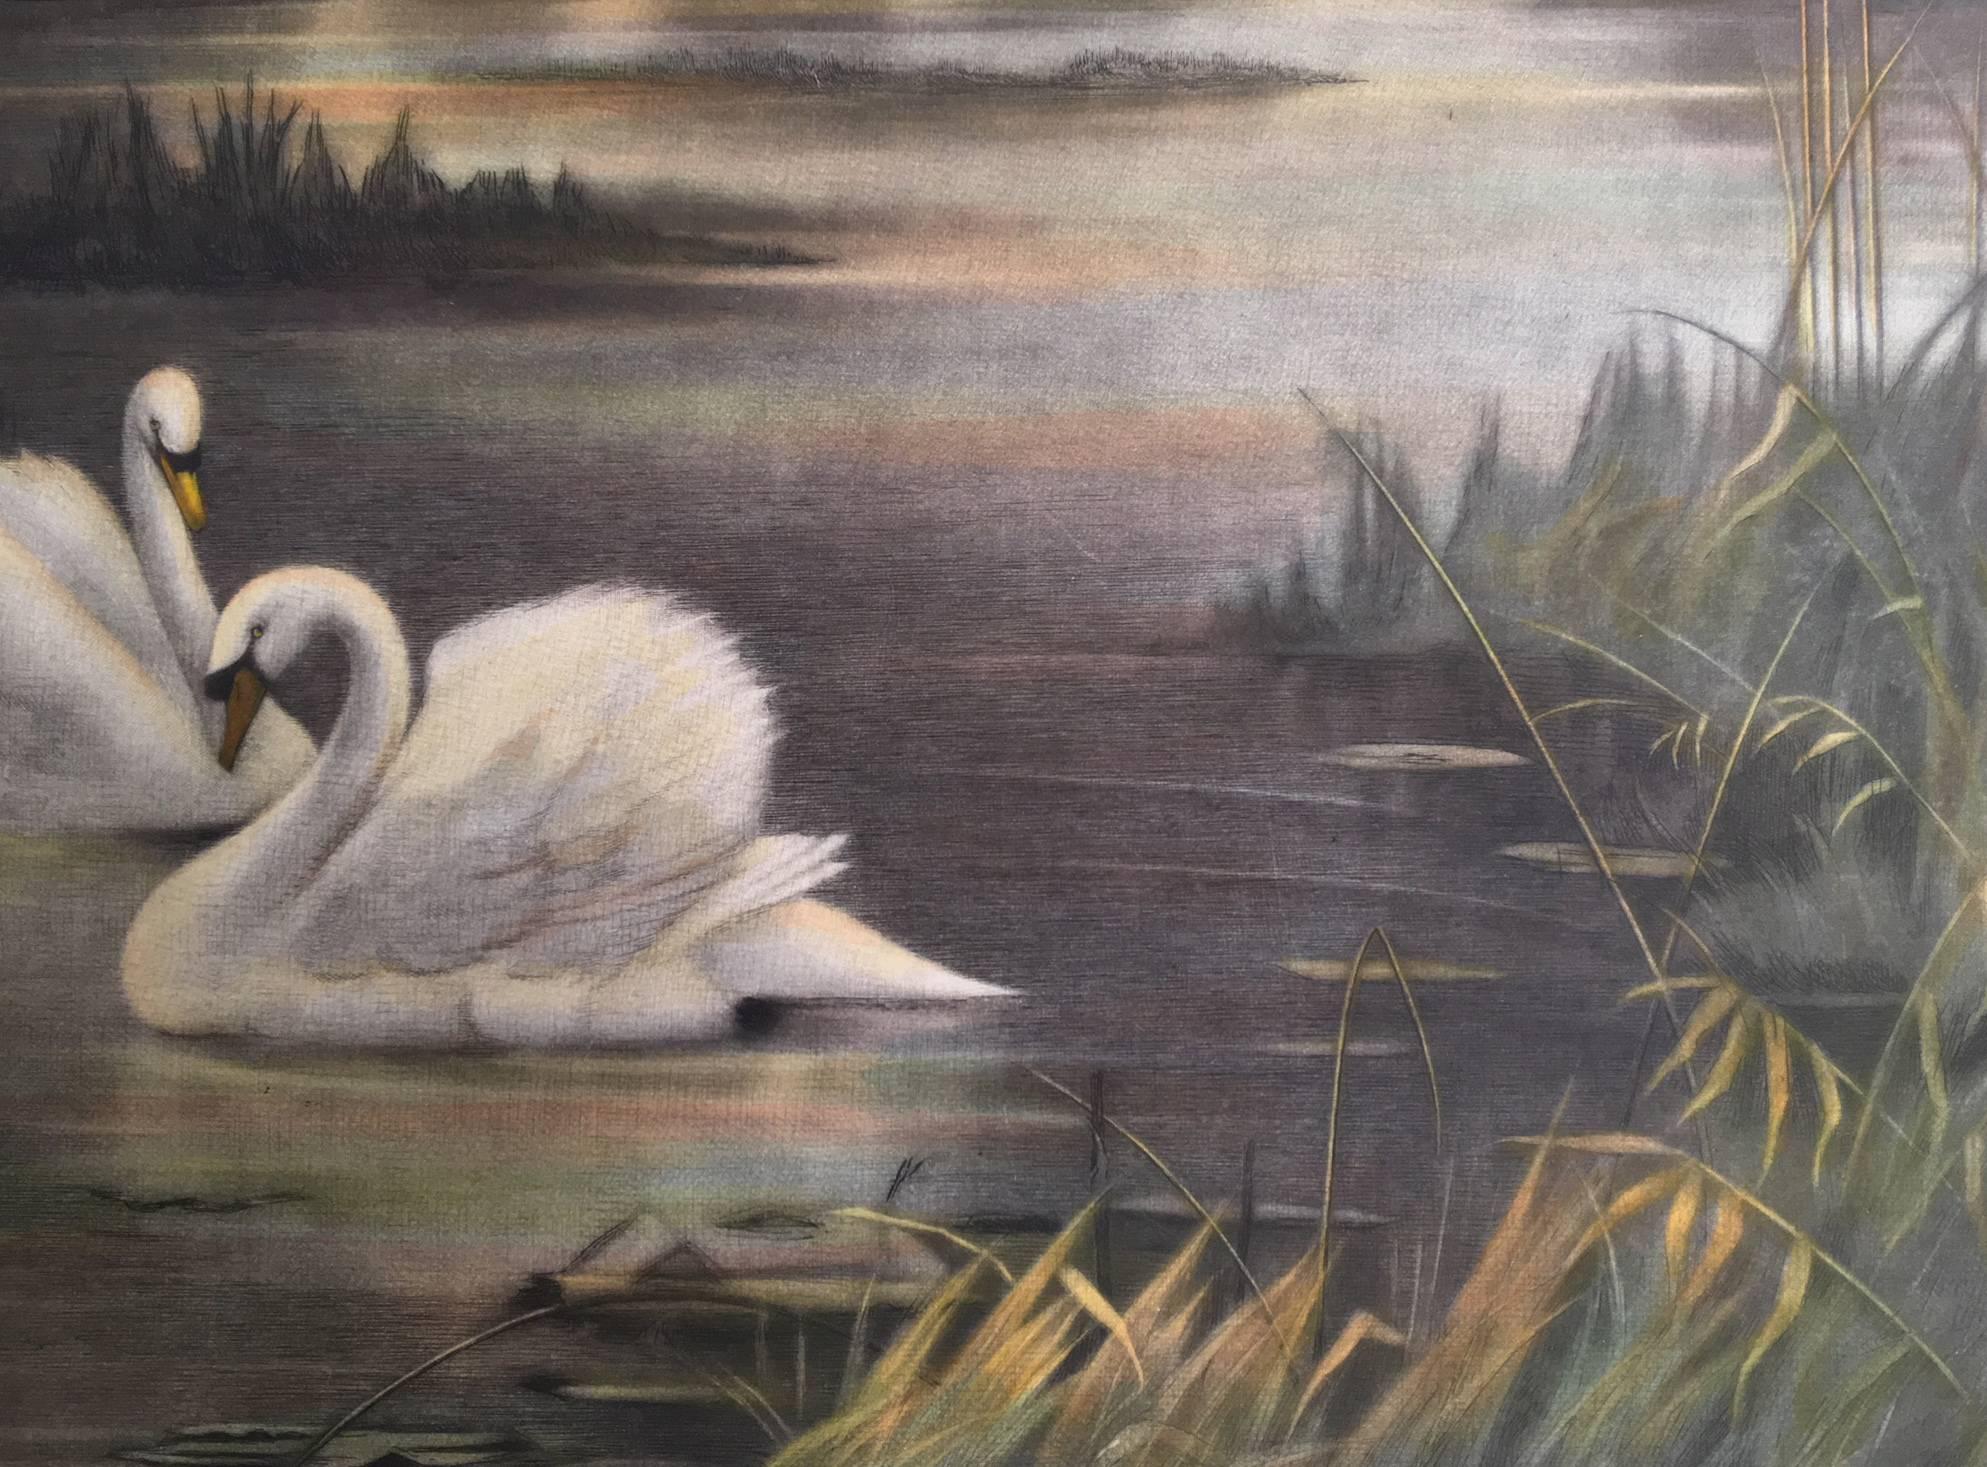 Hand-colored engraving on paper by artist Fred Miller, after a painting by English artist Valentine Davis (1854 – 1930). The piece shows a peaceful lake landscape with two swans in the foreground, as daylight breaks majestically over a distant farm